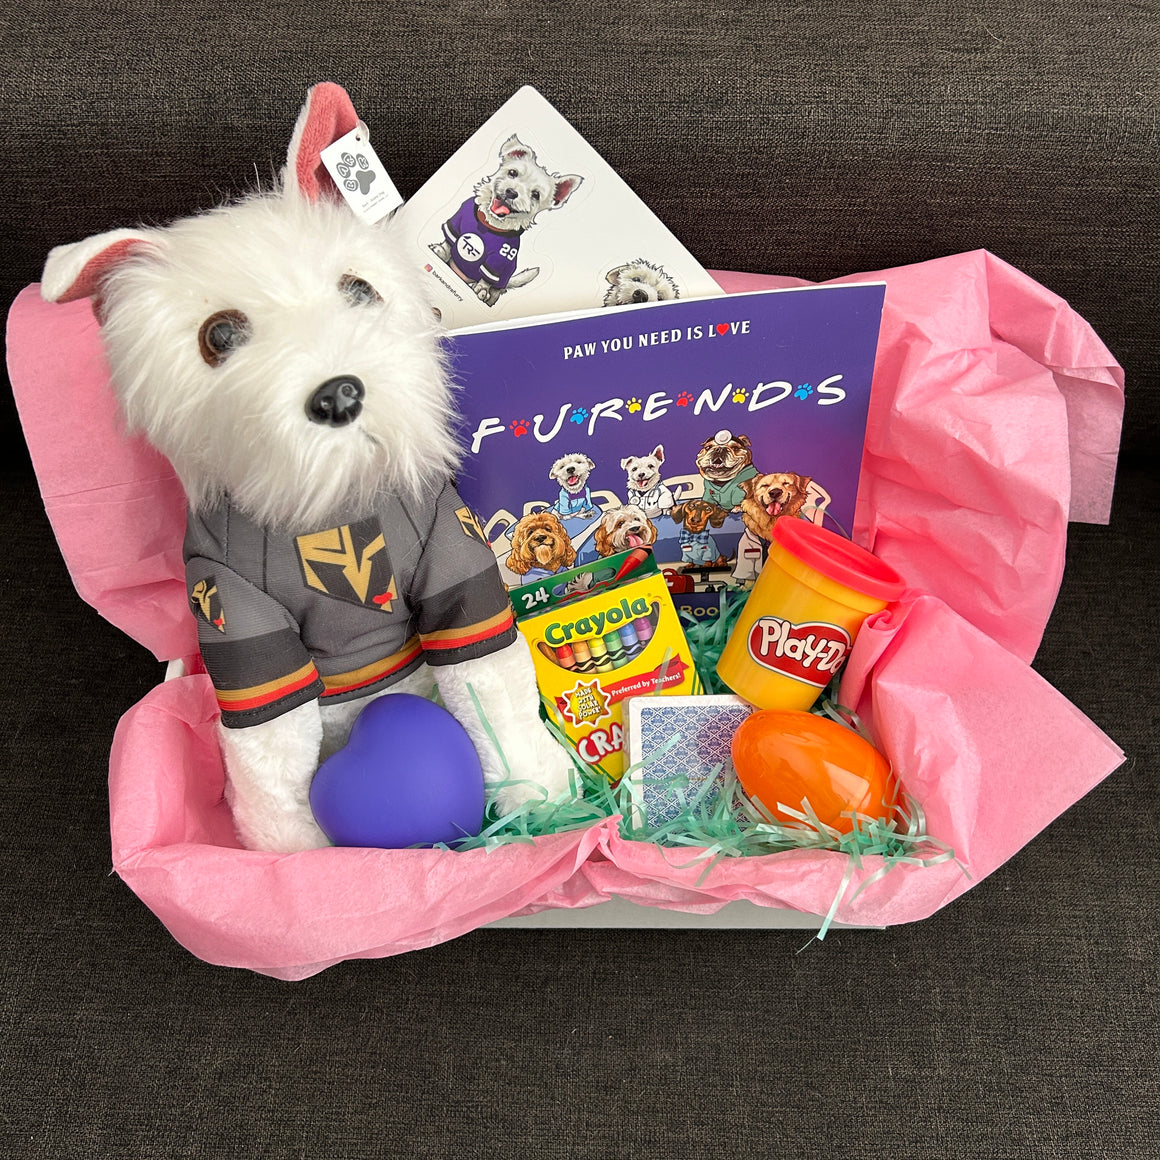 Sponsor an Easter Pawliday Box for a hospitalized child.